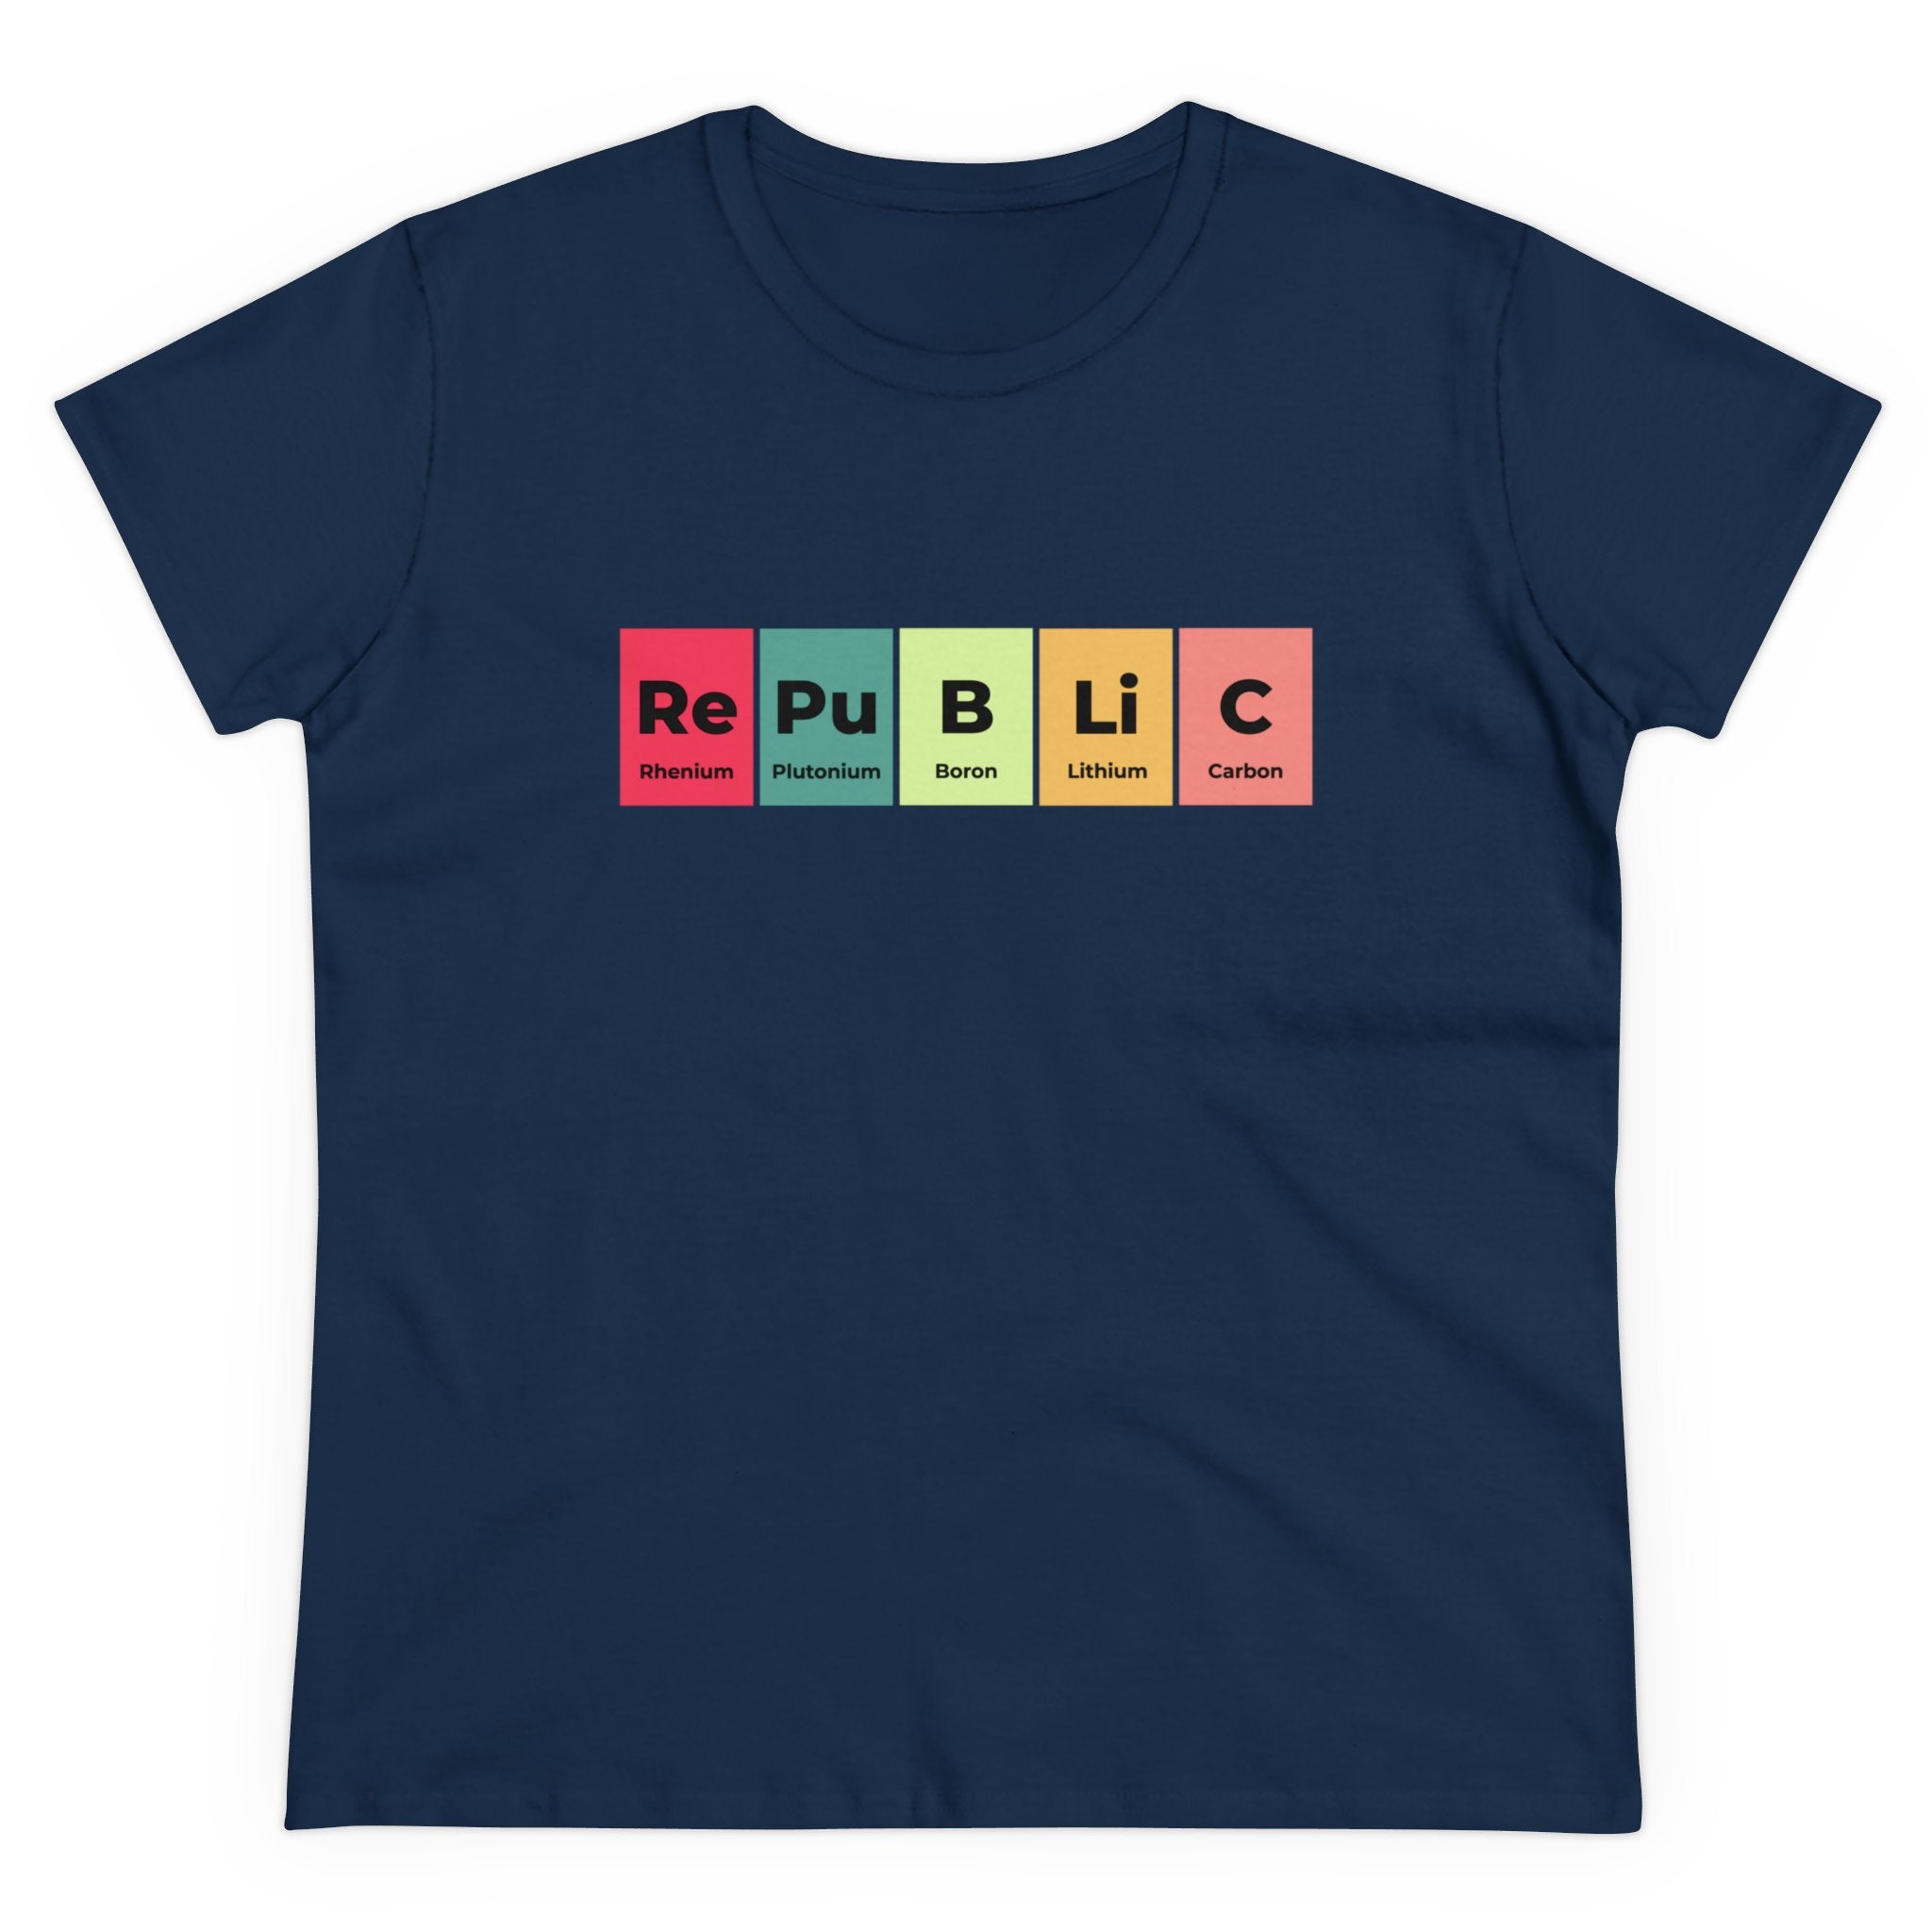 This fashionable navy blue Republic - Women's Tee features the word "RePuBLiC" in periodic table blocks, with elements rhenium, plutonium, boron, lithium, and carbon highlighted. Made from ethically grown US cotton for a stylish and sustainable choice.